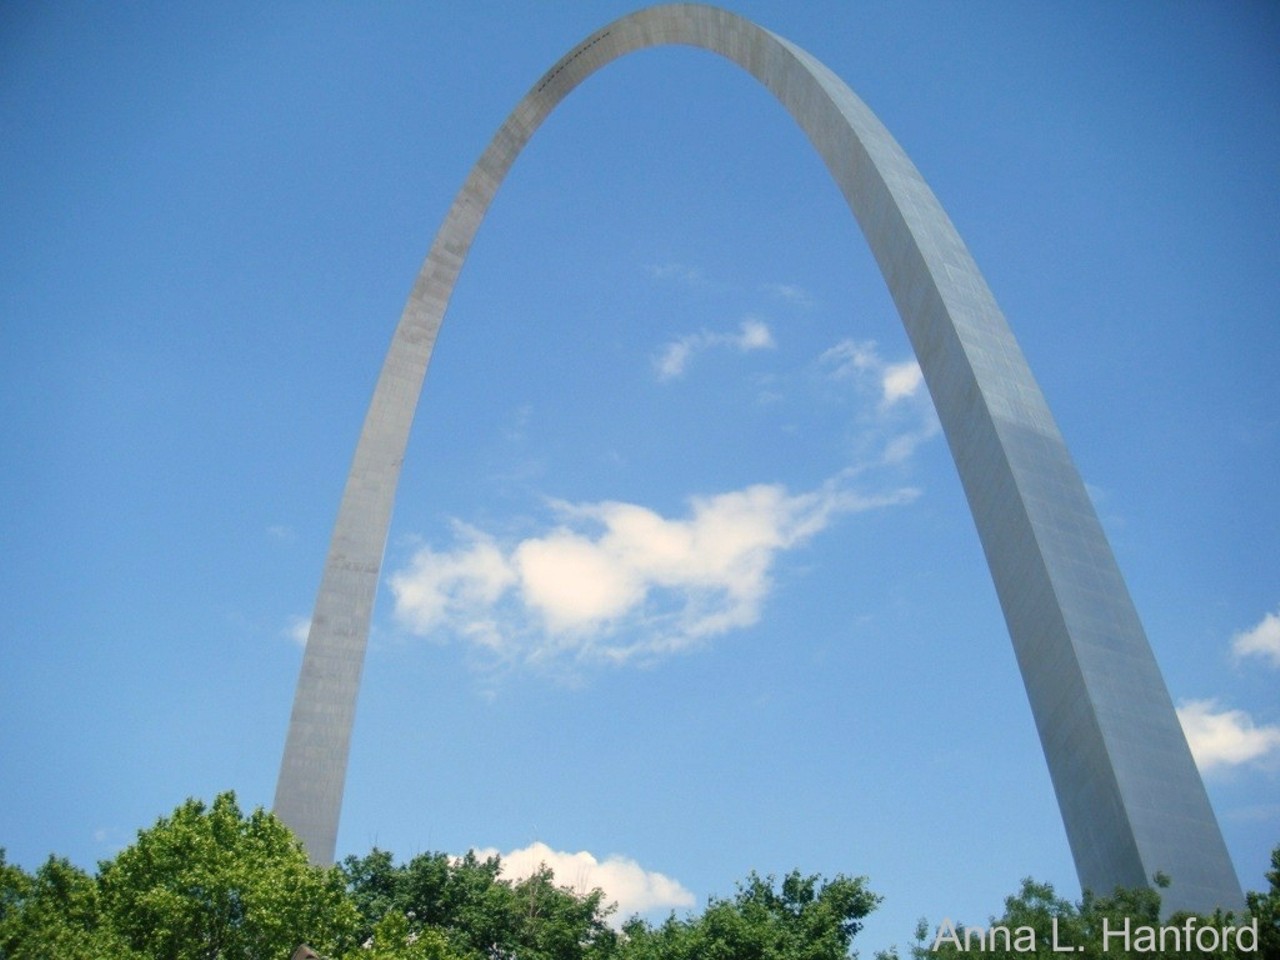 The Gateway Arch
Gateway to the West? More like gateway to a lifetime of happiness! There is not a more St. Louis thing you could do than get married under the most significant monument in the city. To find out about scheduling your special day here, call 314-655-1611 for more information. Photo via Flickr /Anna 